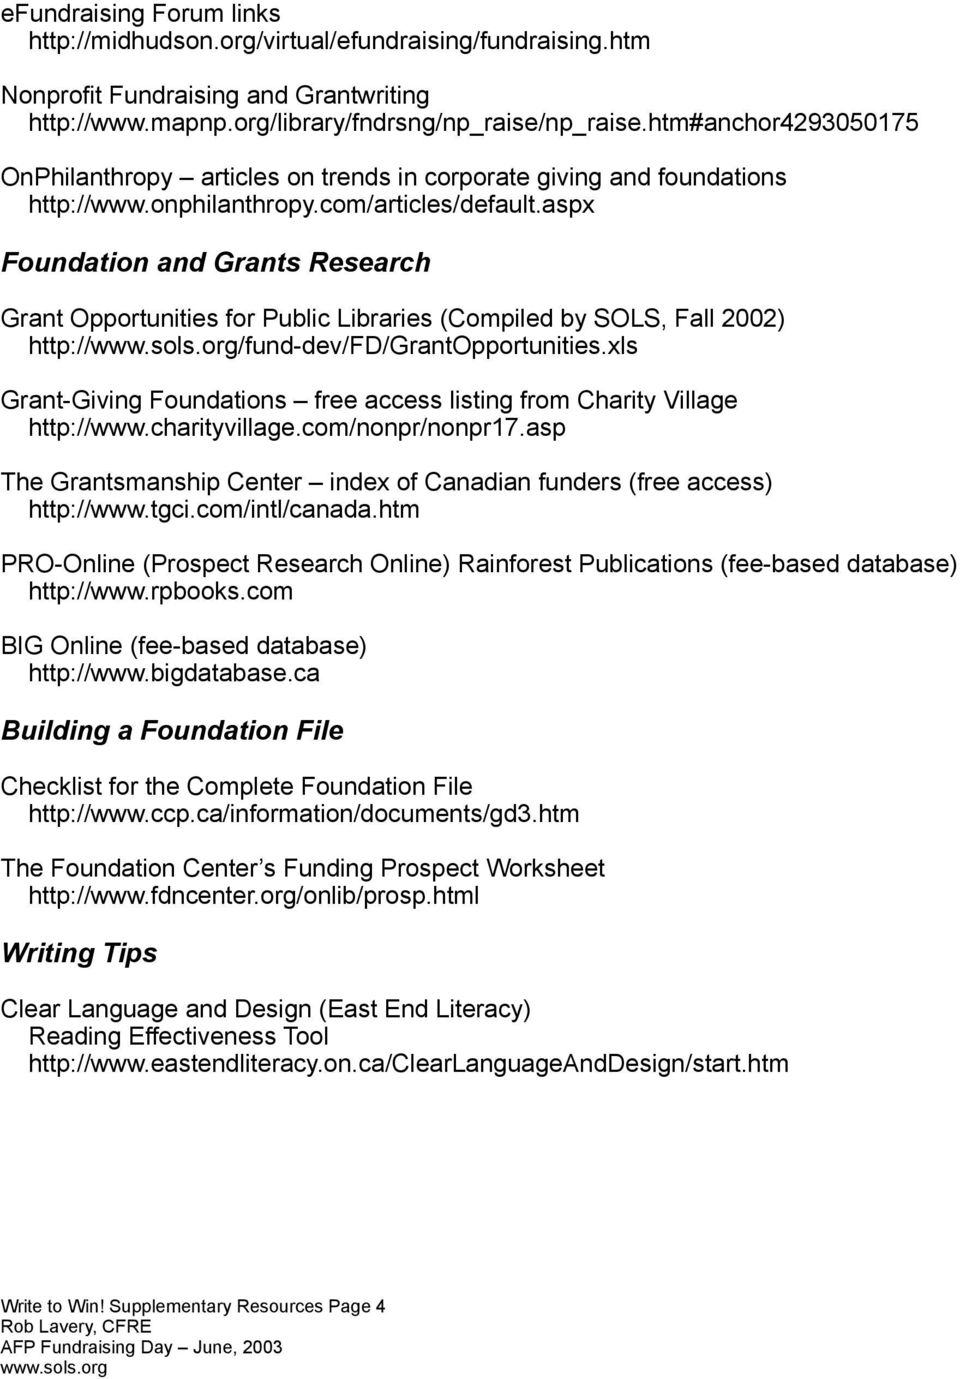 aspx Foundation and Grants Research Grant Opportunities for Public Libraries (Compiled by SOLS, Fall 2002) http://www.sols.org/fund-dev/fd/grantopportunities.